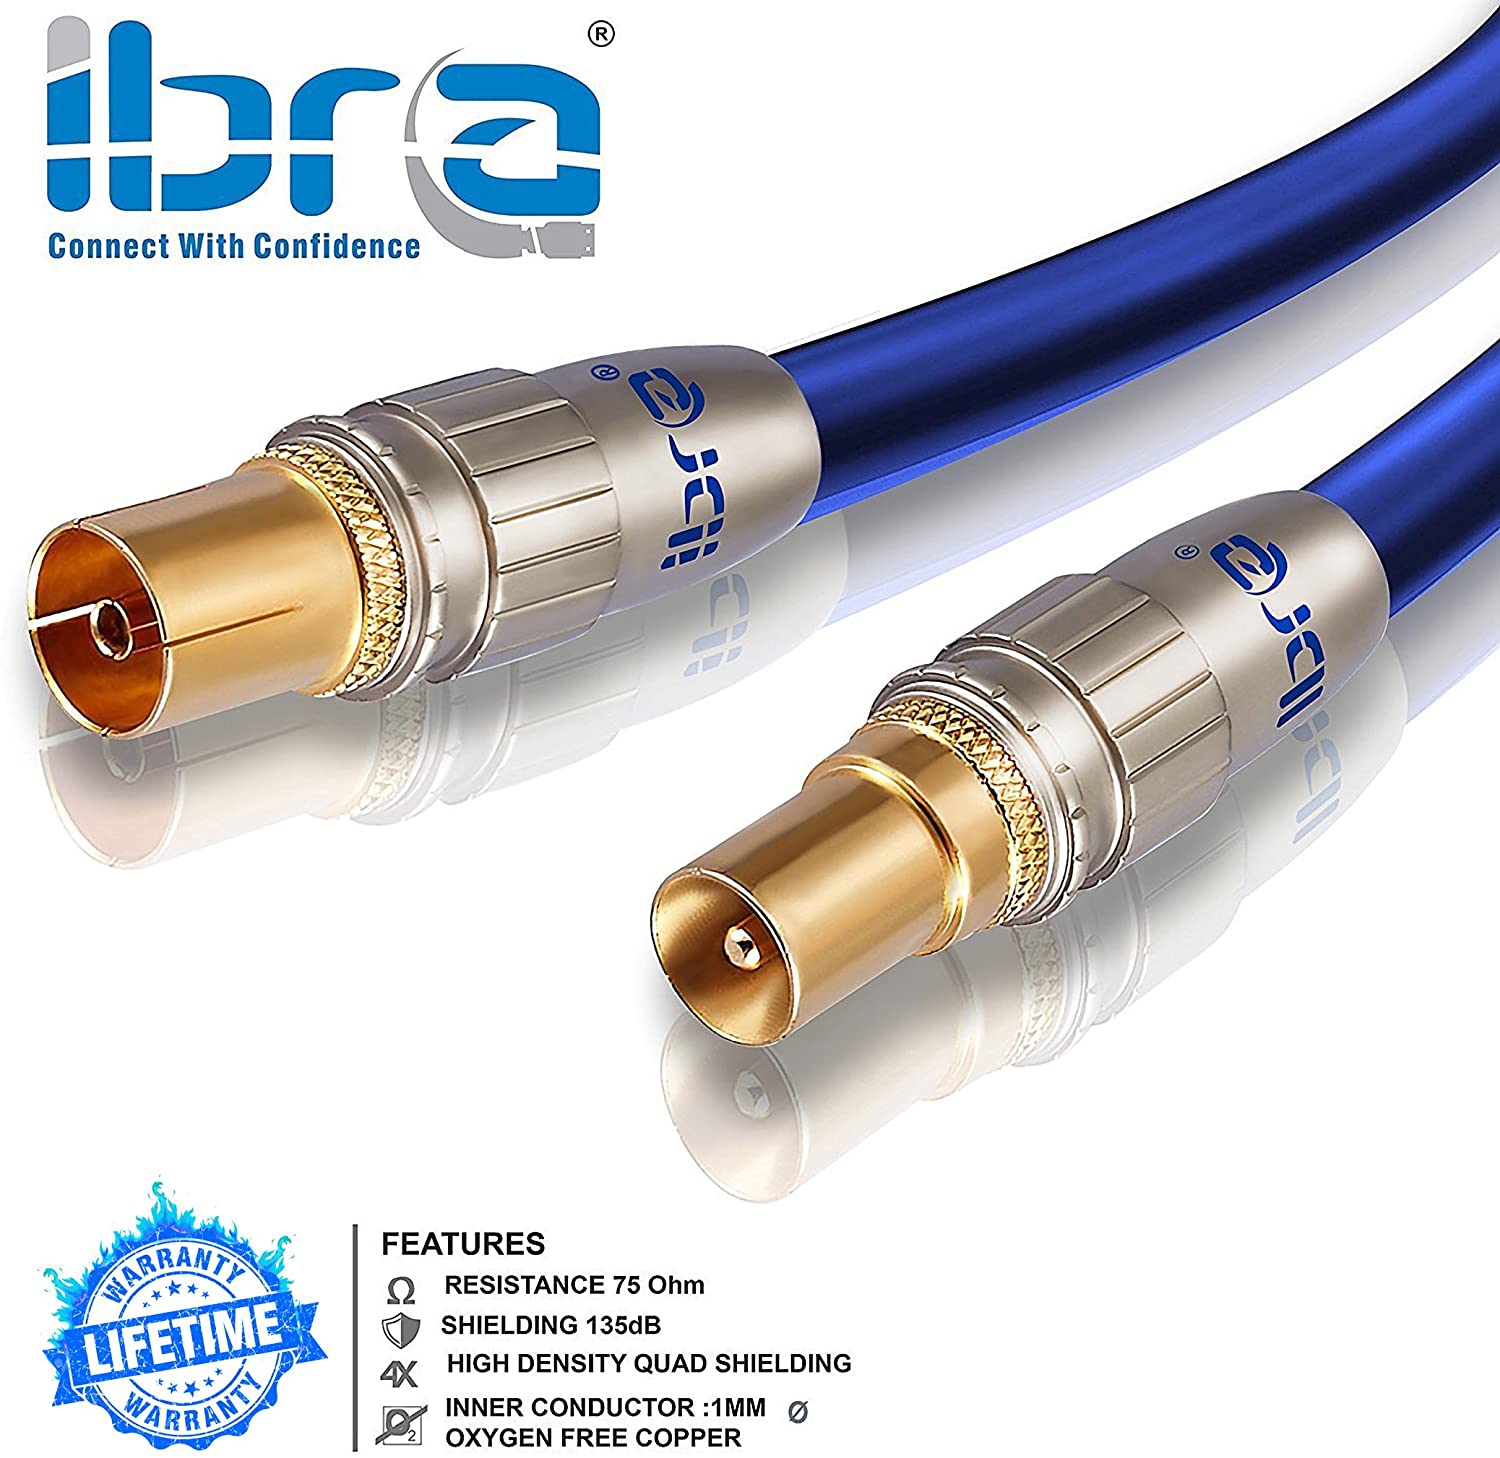 2m HDTV Antenna Cable|TV Aerial Cable|Premium Coaxial Cable|Connectors: Coax Male to Coax Female|For UHF/RF/DVB-T/DVB-T2 TVs, VCRs, DVD players, DVRs, cable boxes and satellite| IBRA Blue Gold